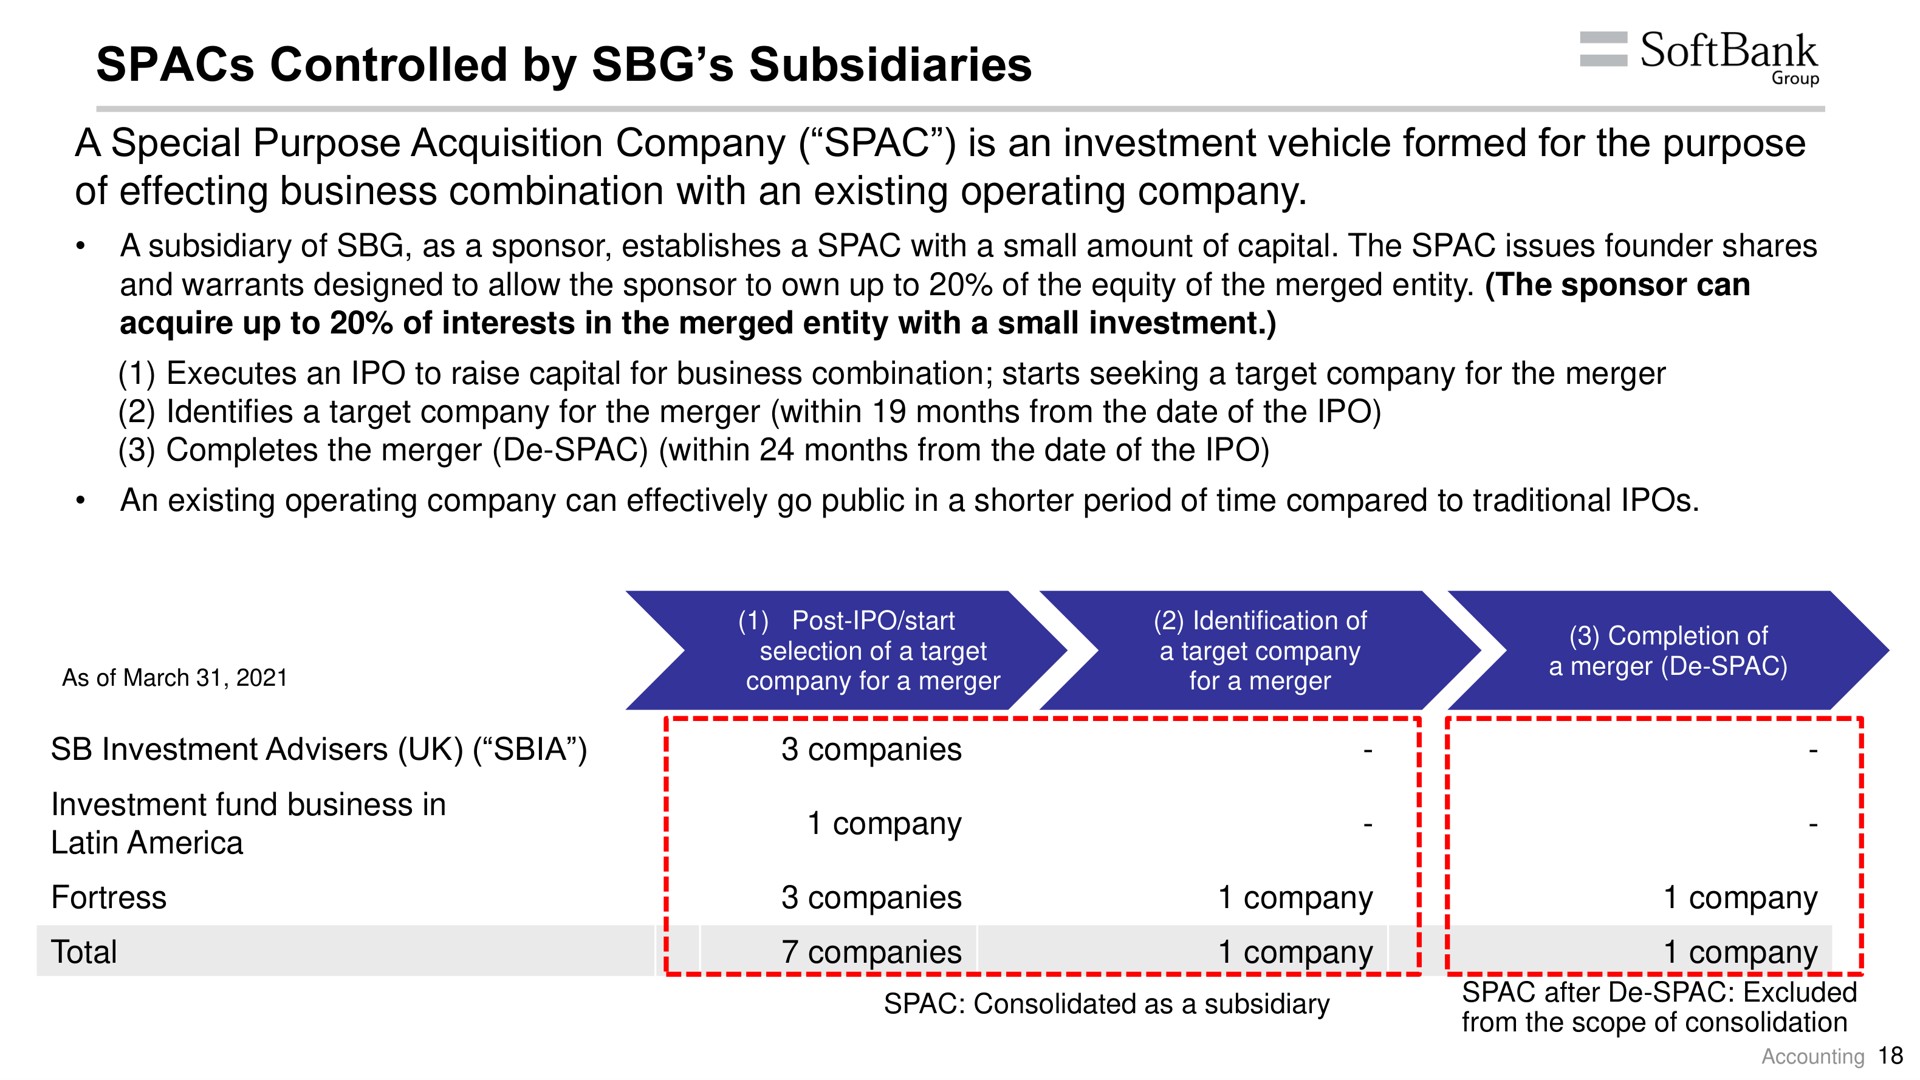 controlled by subsidiaries a special purpose acquisition company is an investment vehicle formed for the purpose of effecting business combination with an existing operating company total companies | SoftBank